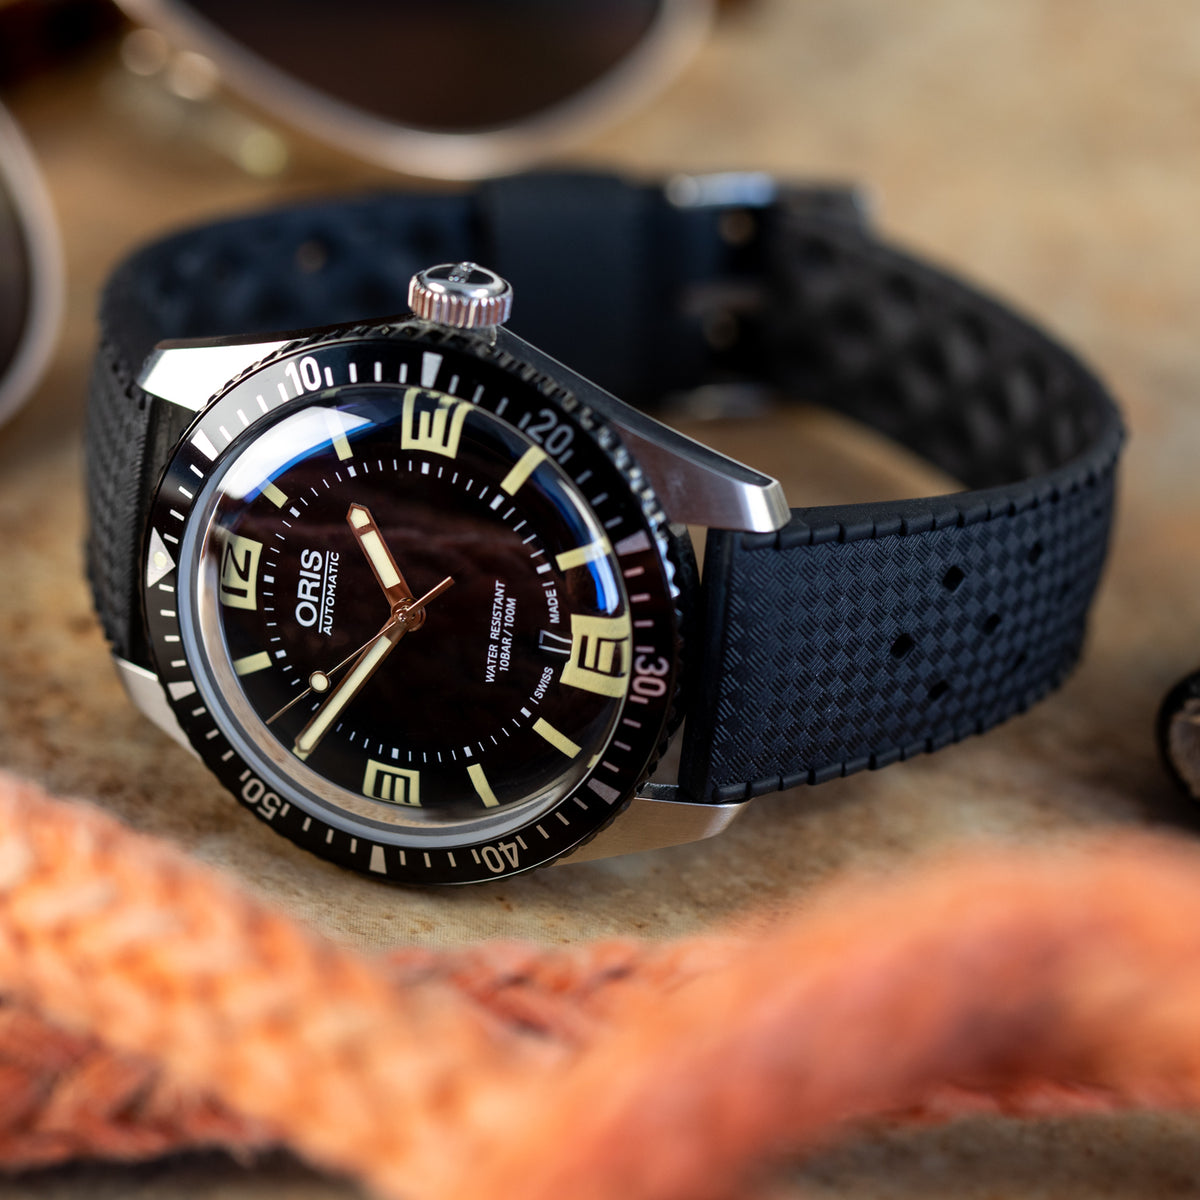 5 Watch straps to fit to the Oris 65 Diver